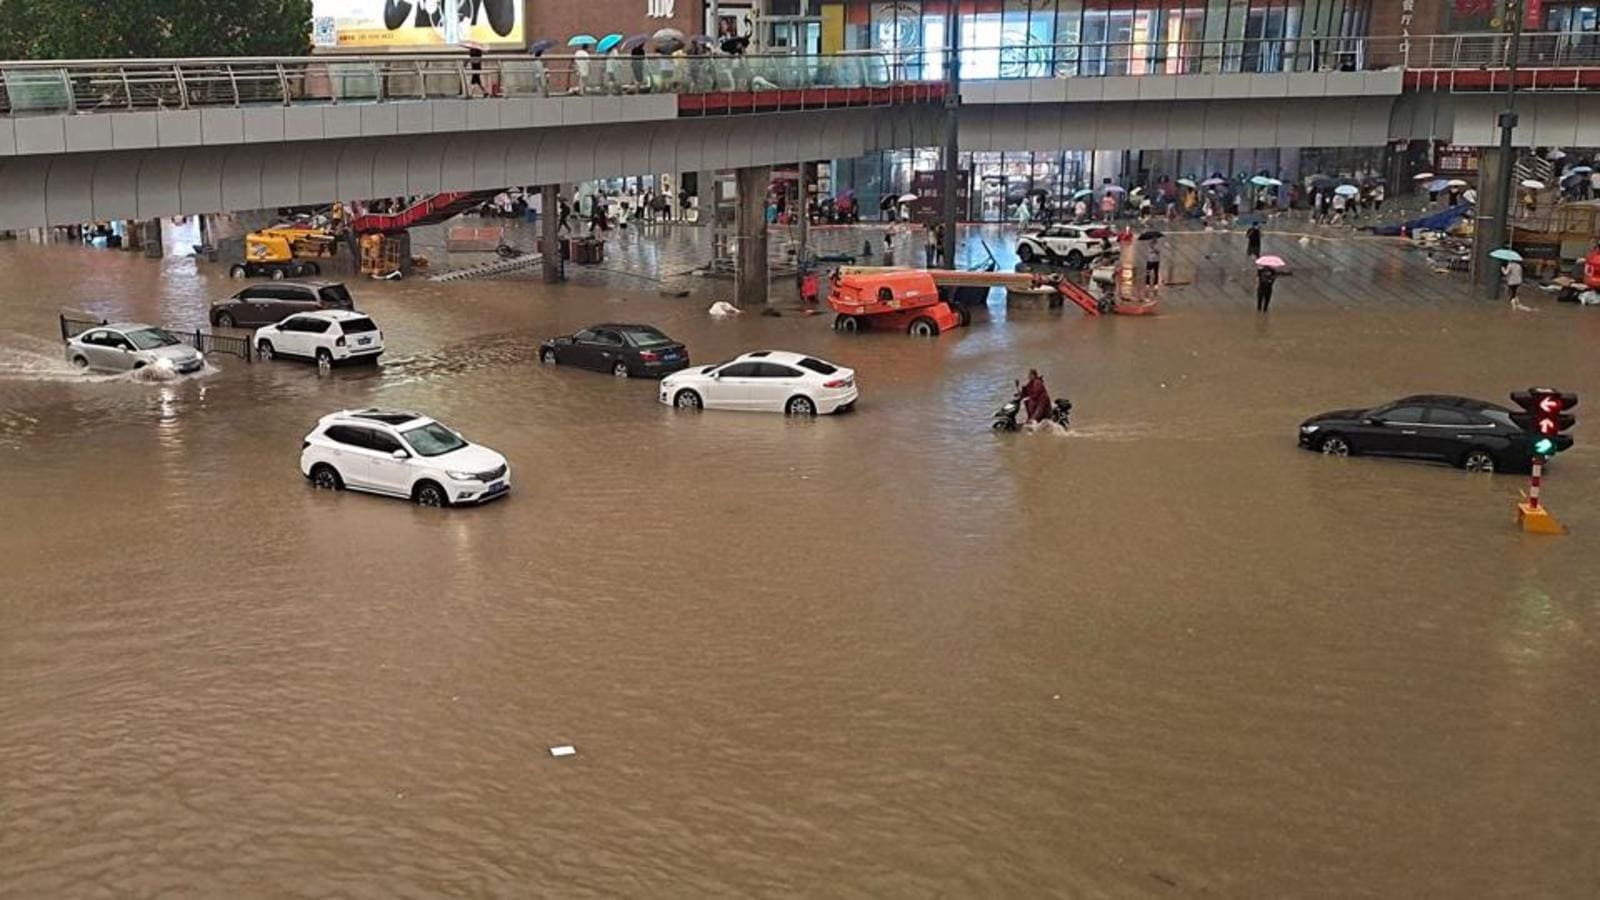 25 killed in central China floods, military deployed | World News